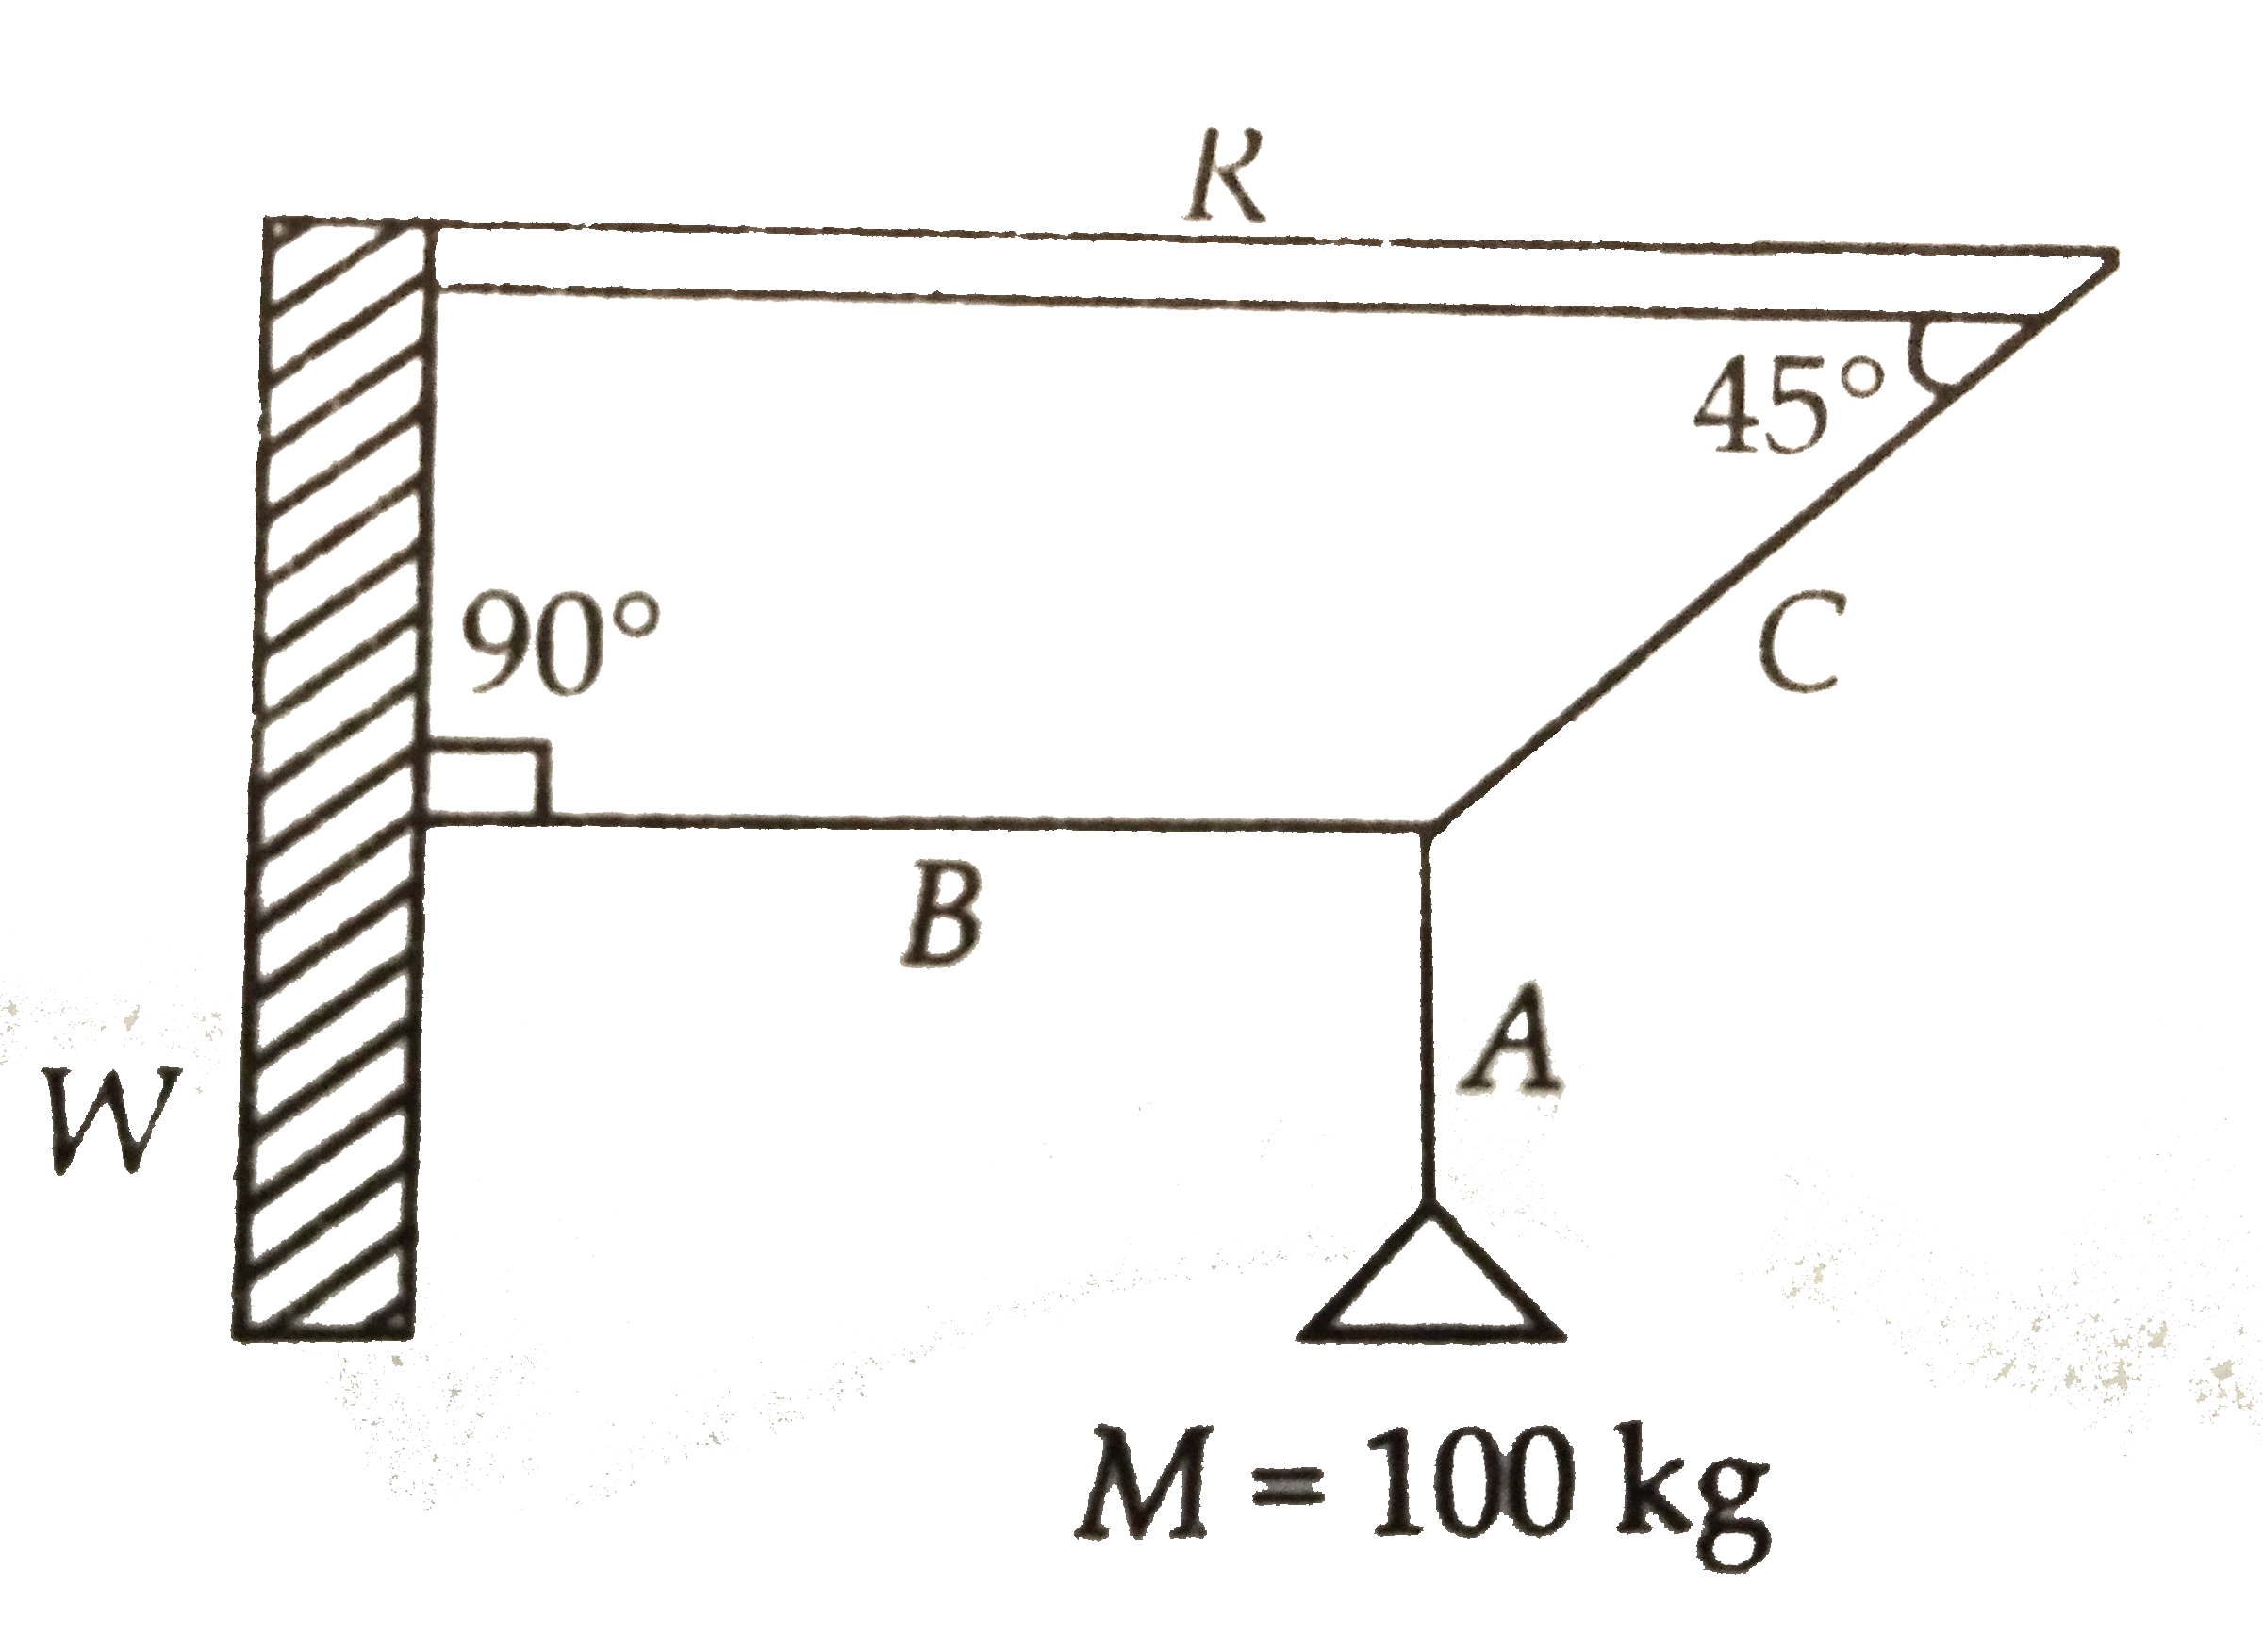 A mass M of 100 kg is suspended with the use of strings A, B 90 and C as shown in the figure, where W is the  vertical wall and R is a rigid horizontal rod.  The tension in the string B is